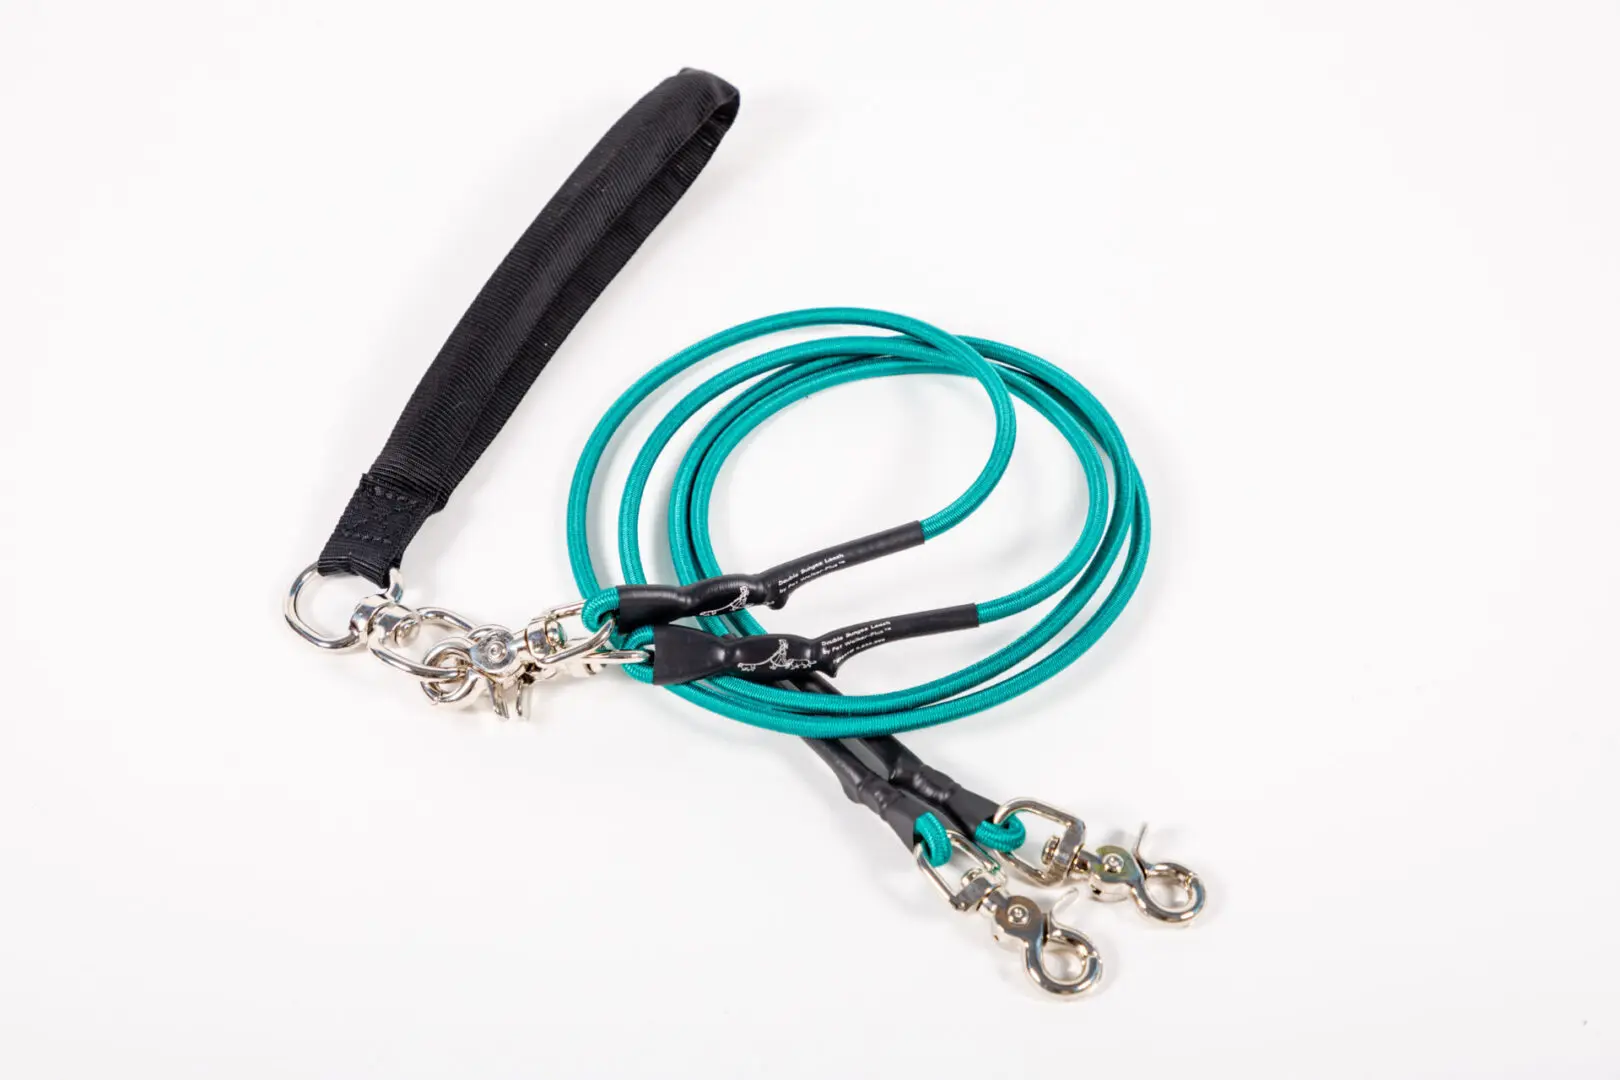 A Teal Color Double Bungee Leash One